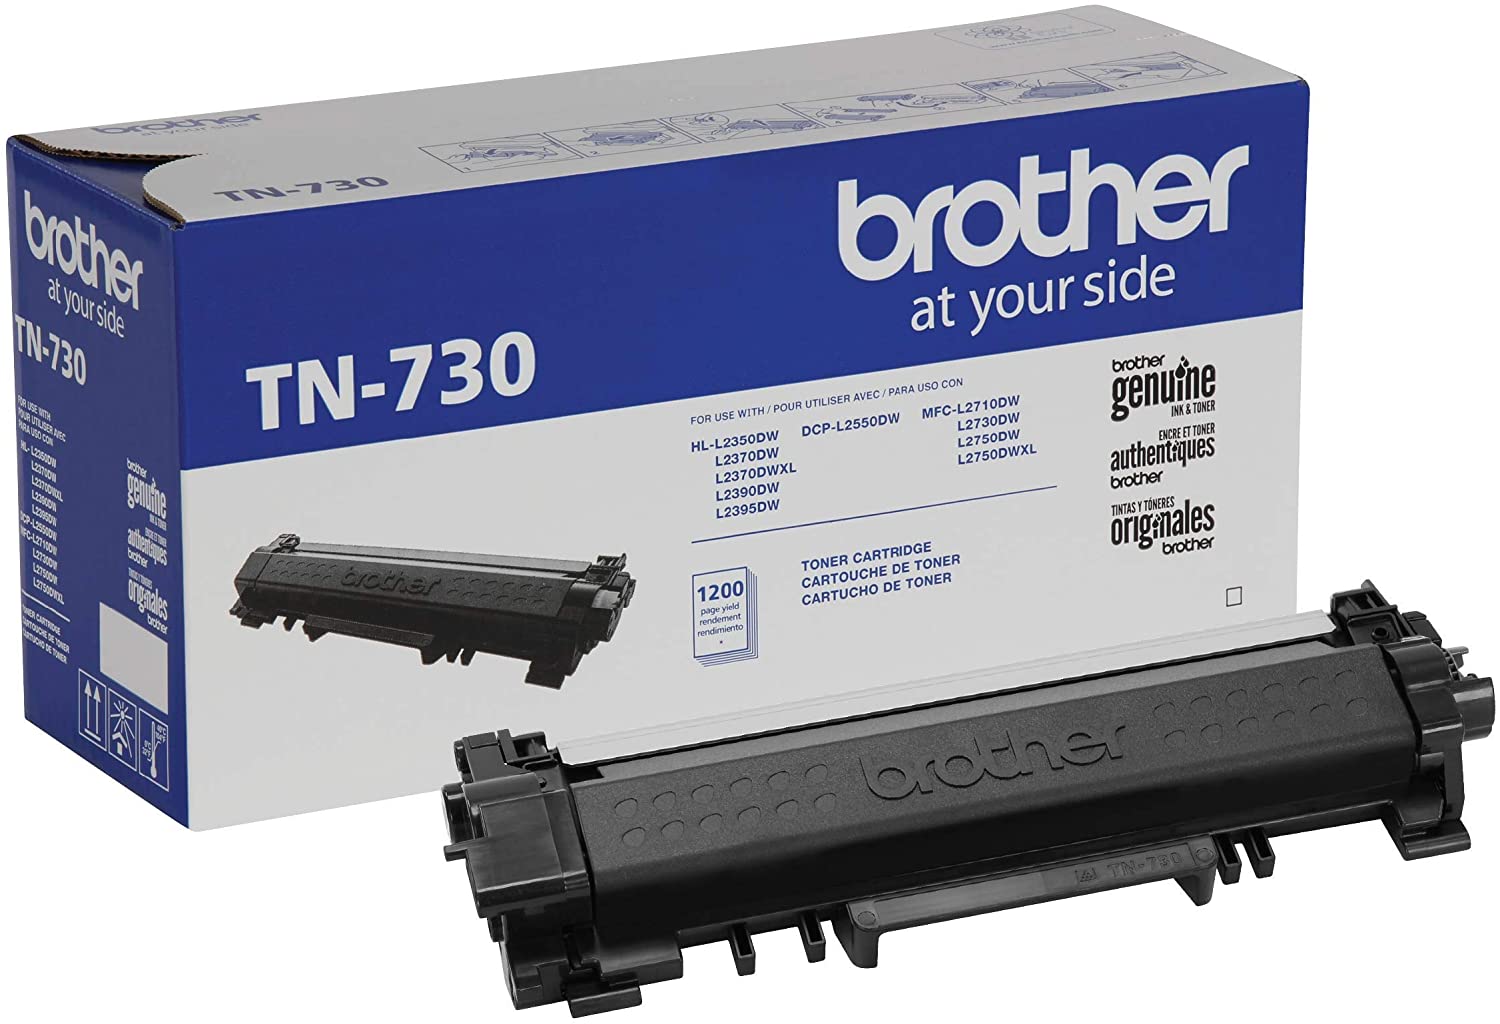 7Magic TN1050 Toner Cartridges Replacement for Toner Brother TN-1050  Compatible for Brother DCP-1610W DCP-1612W DCP-1510 DCP-1512 HL-1112  HL-1110